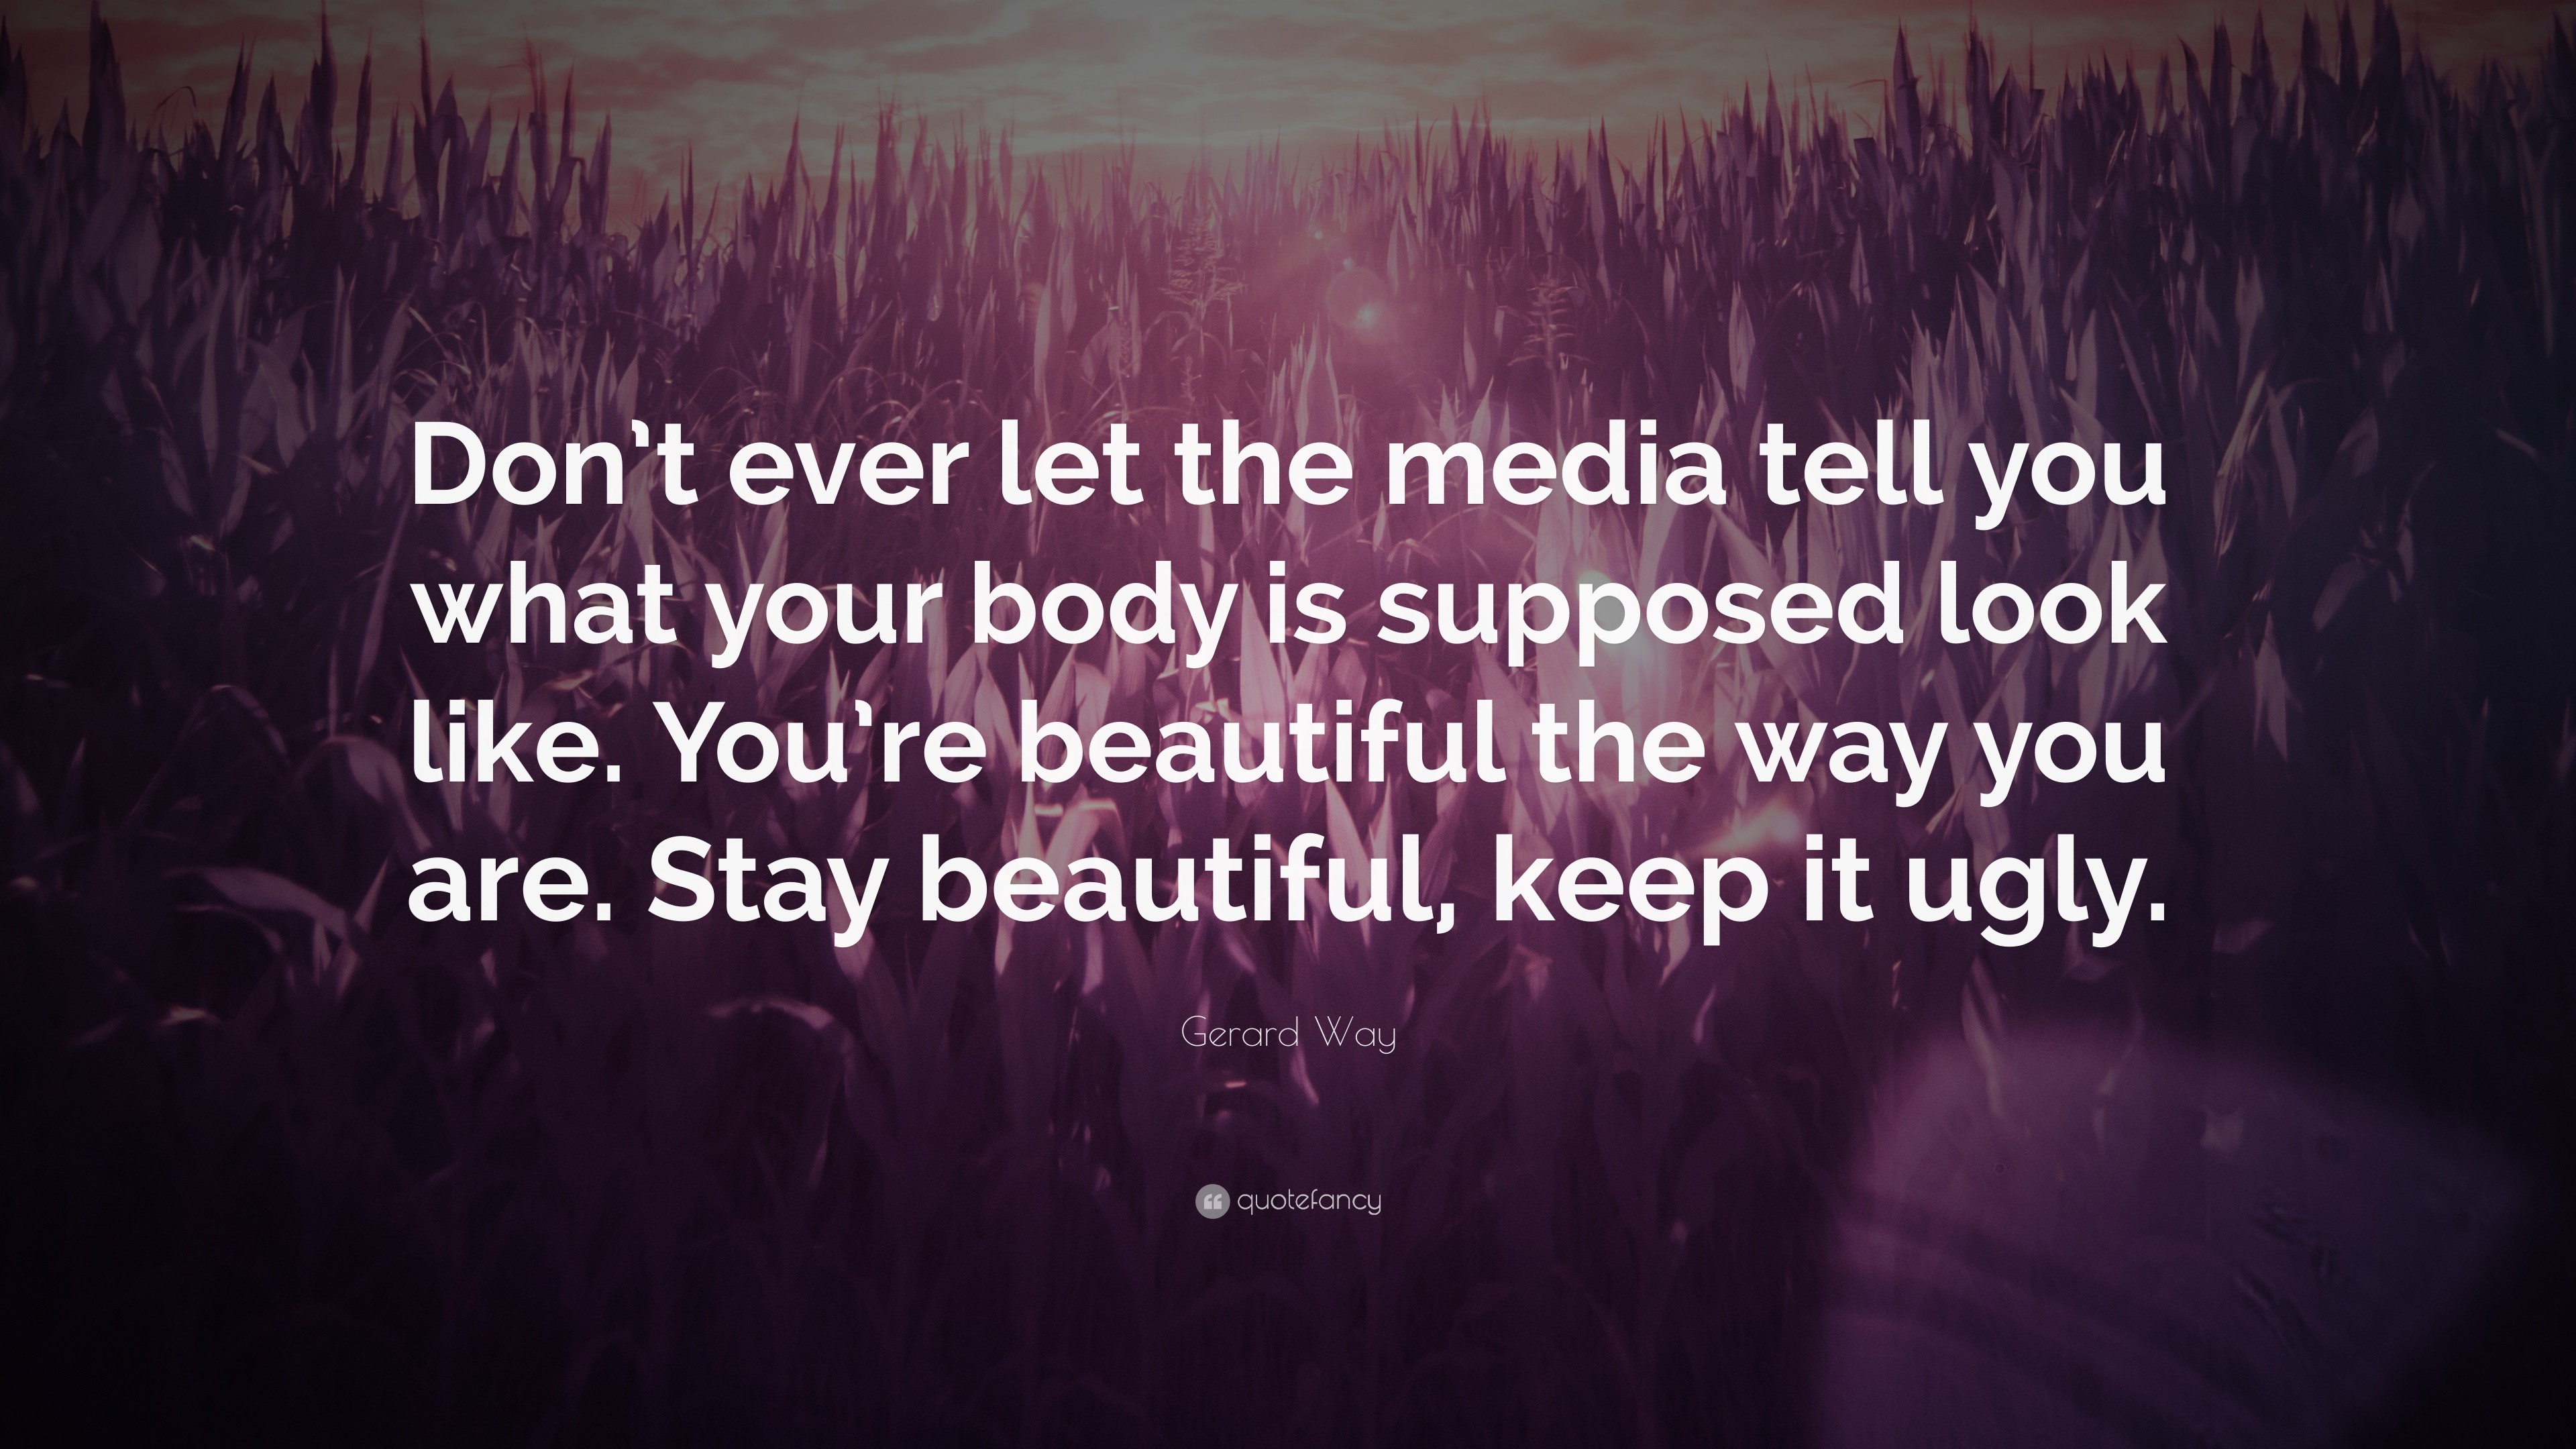 3840x2160 Gerard Way Quote: “Don't ever let the media tell you what your